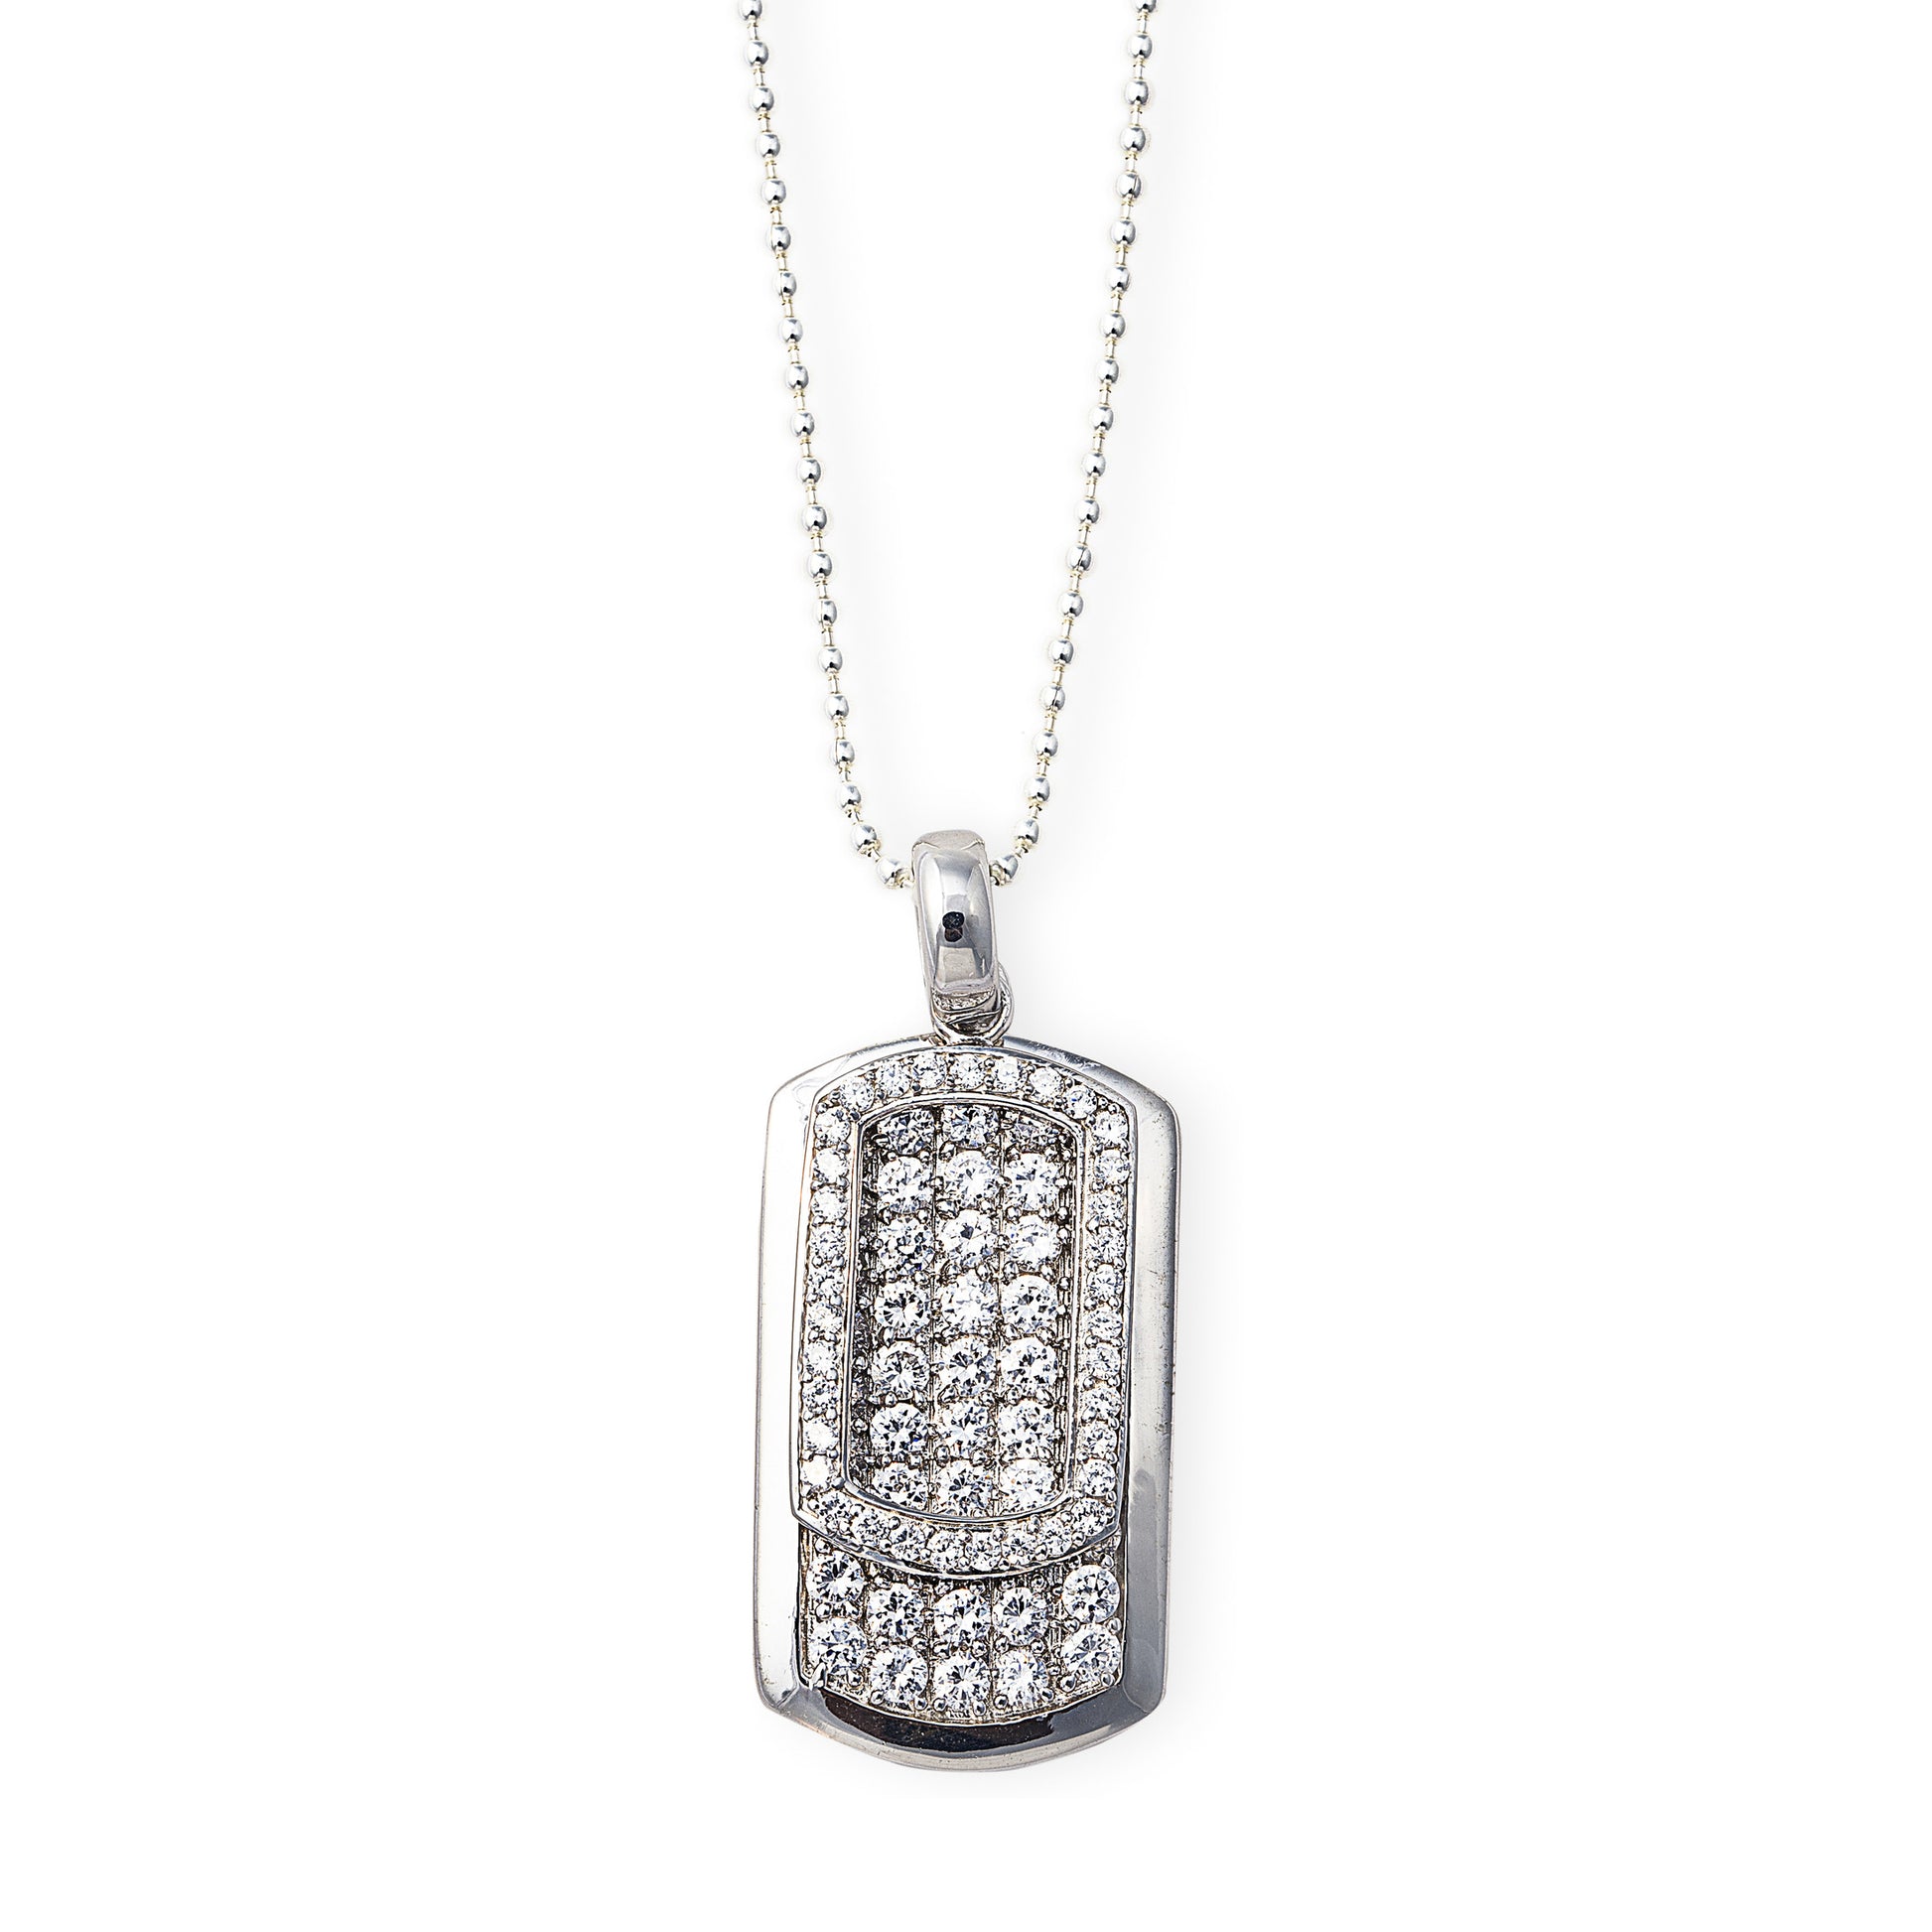 The High Bling Tag Necklace in 925 Sterling Silver and Cubic Zirconia Stones. Big on Bling! Worldwide Shipping. Affordable luxury jewellery by Bellagio & Co.